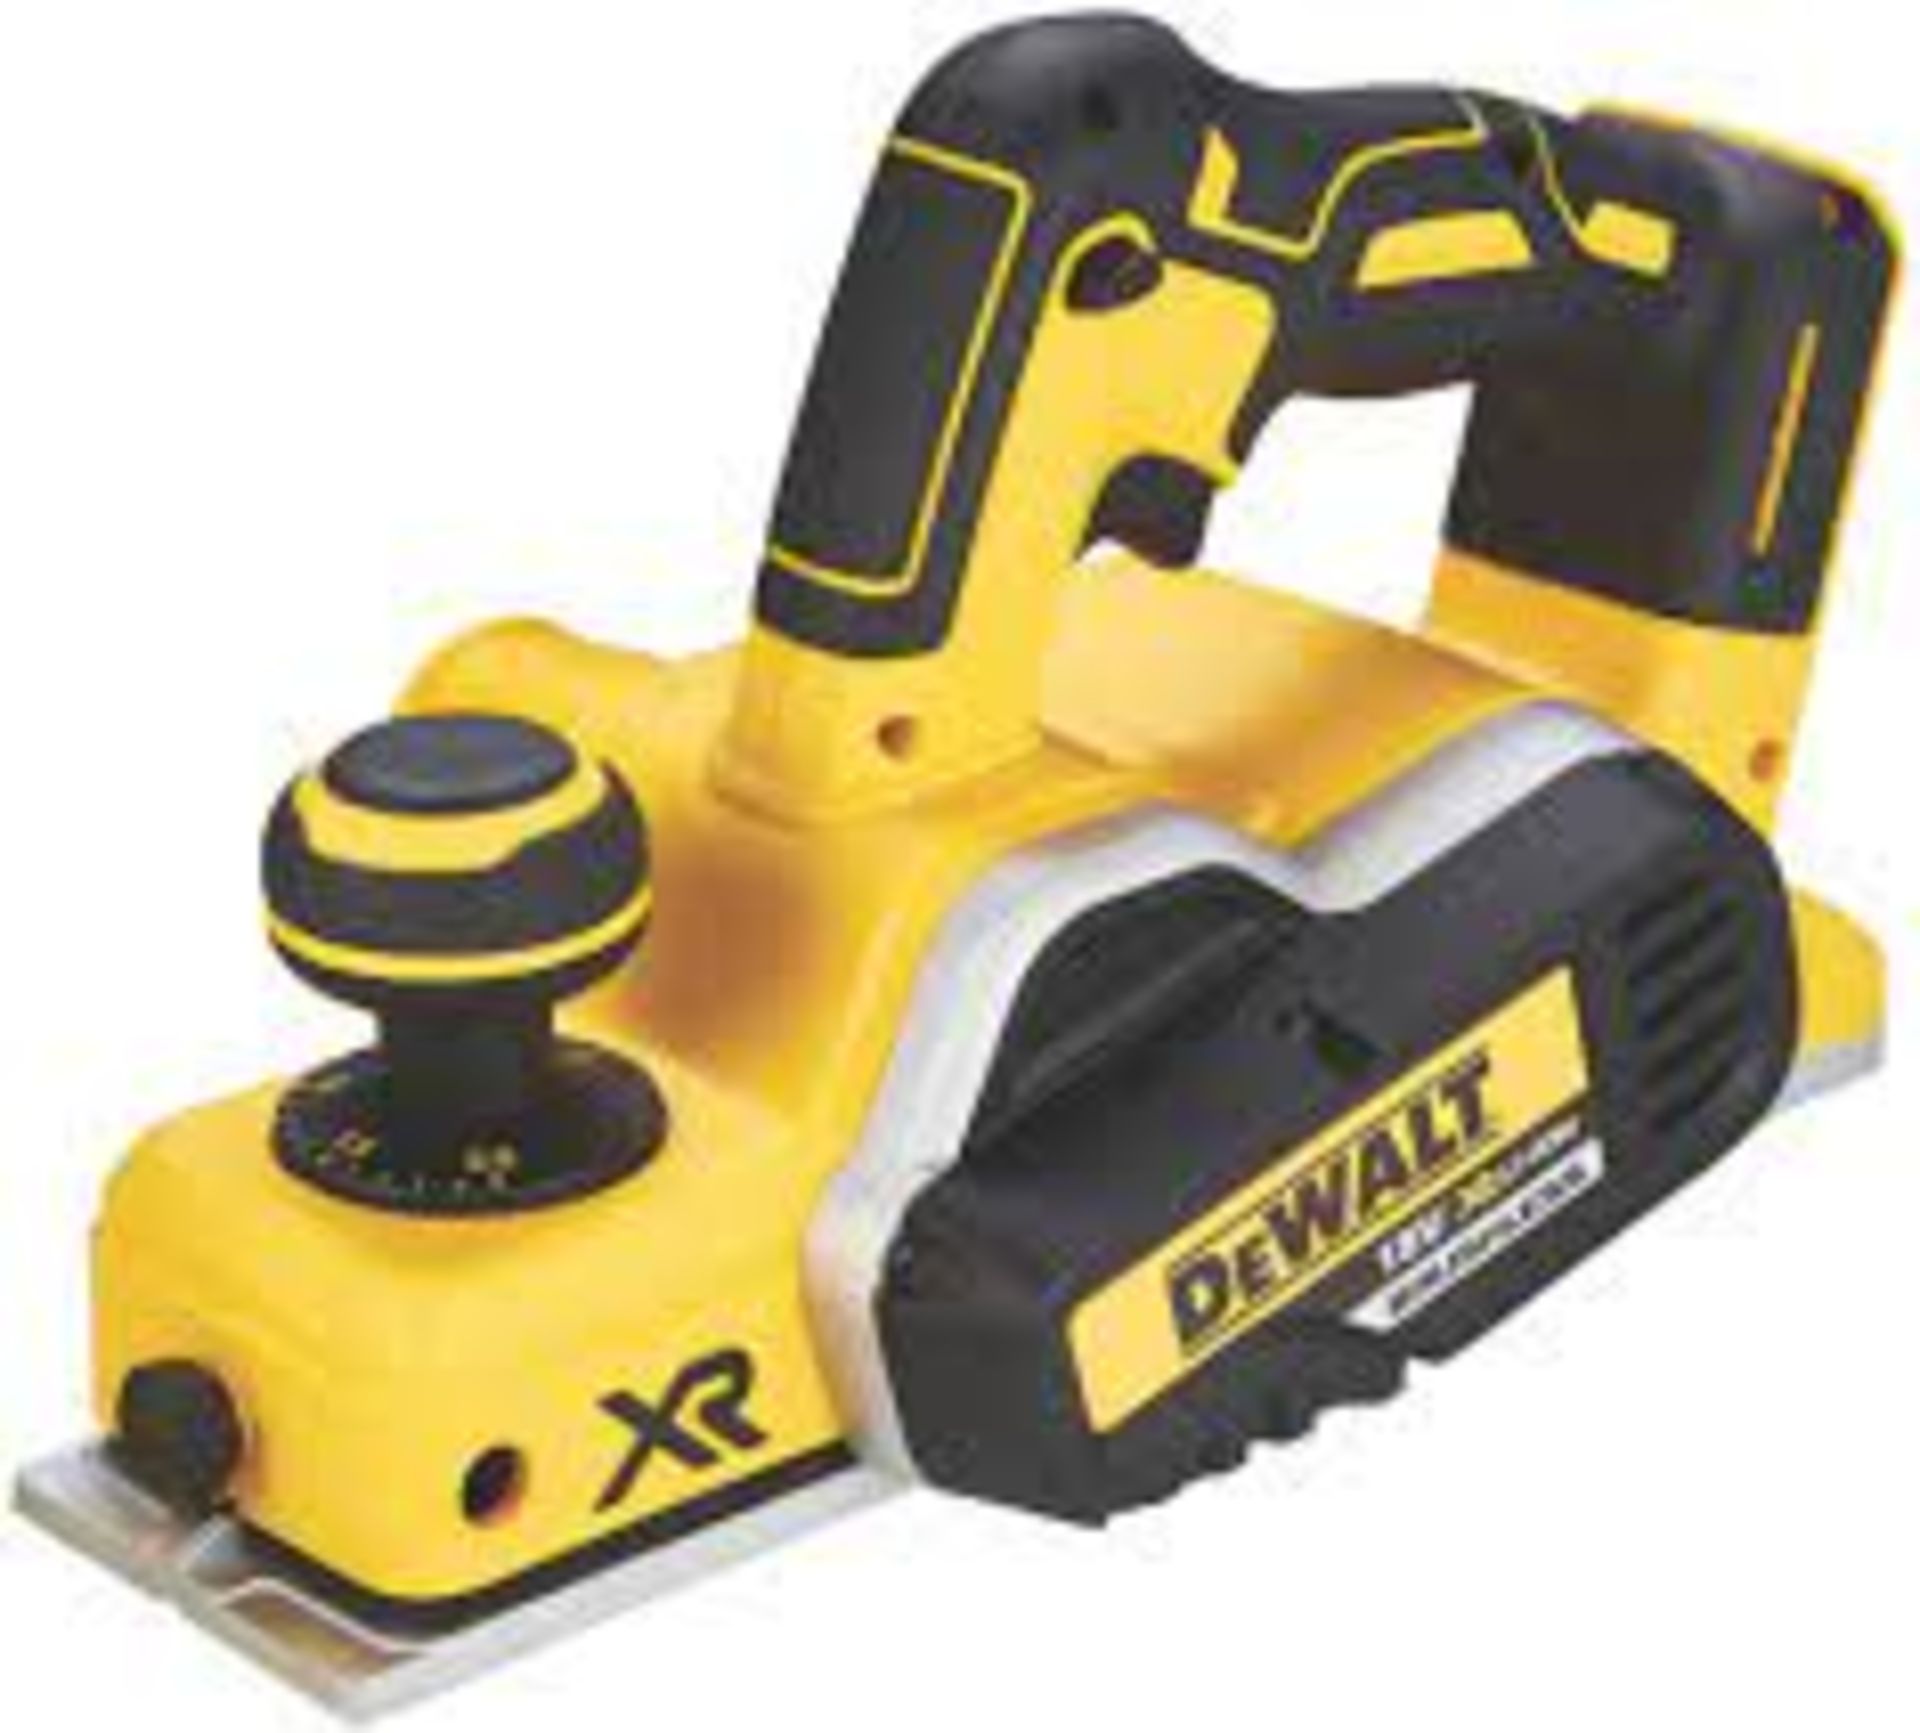 DEWALT DCP580N-XJ 18V LI-ION XR BRUSHLESS CORDLESS PLANER - BARE. - P2. RRP £199.99. Compact and